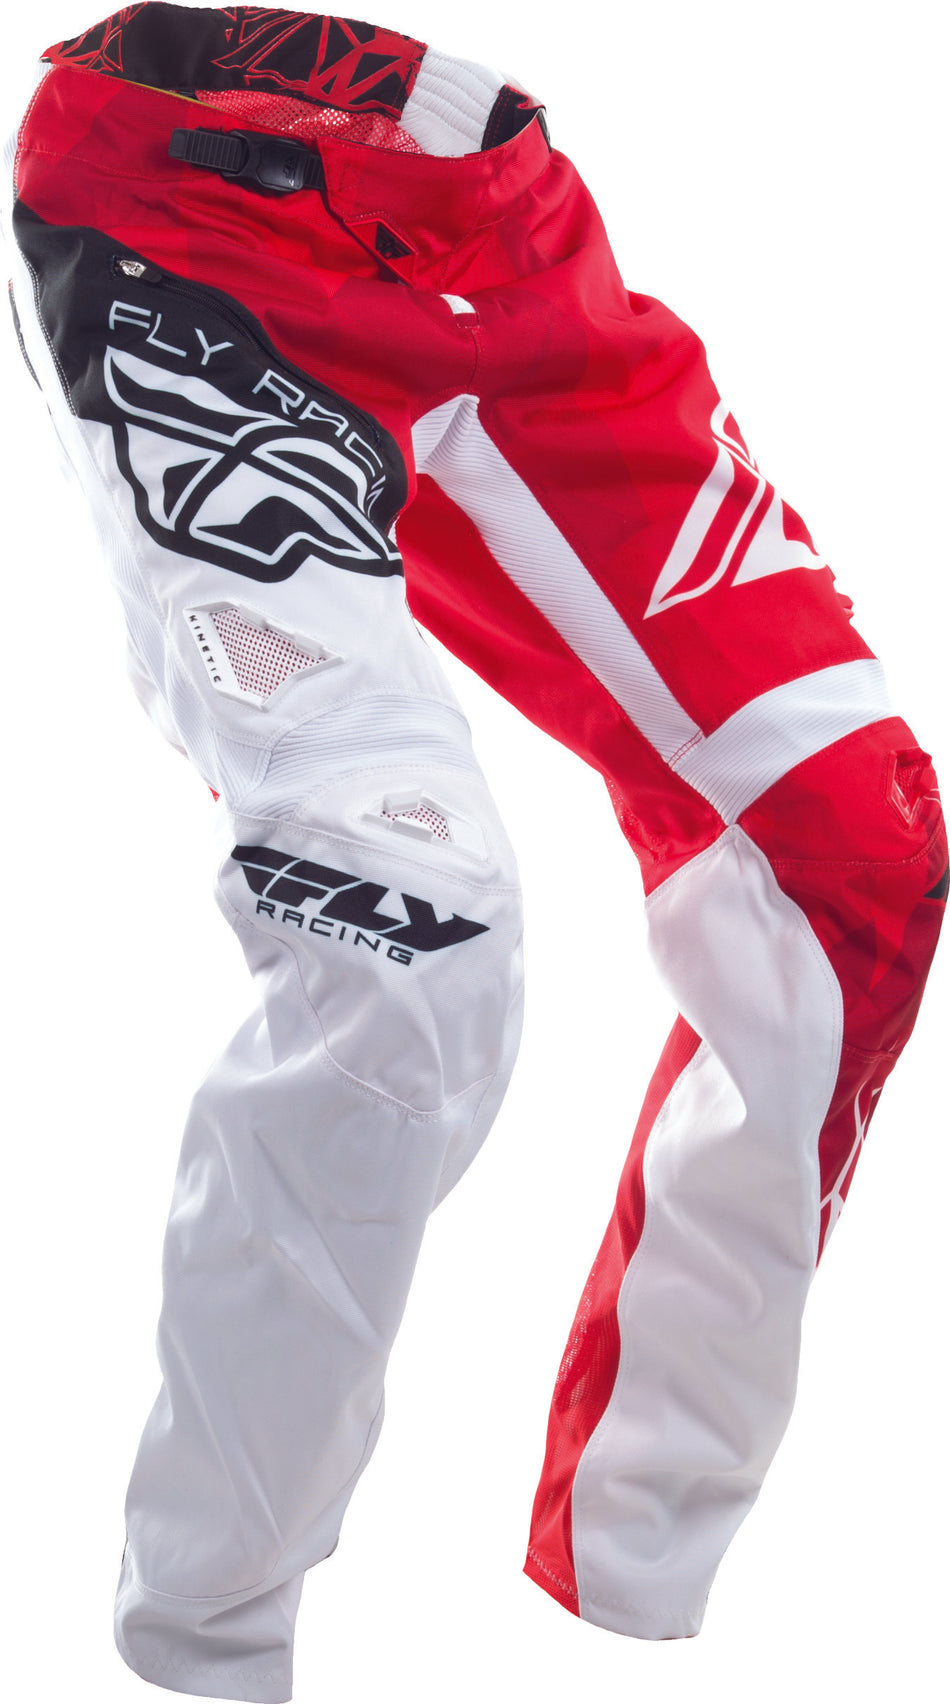 FLY RACING Bicycle Crux Pant Red/White Sz 20 370-02220